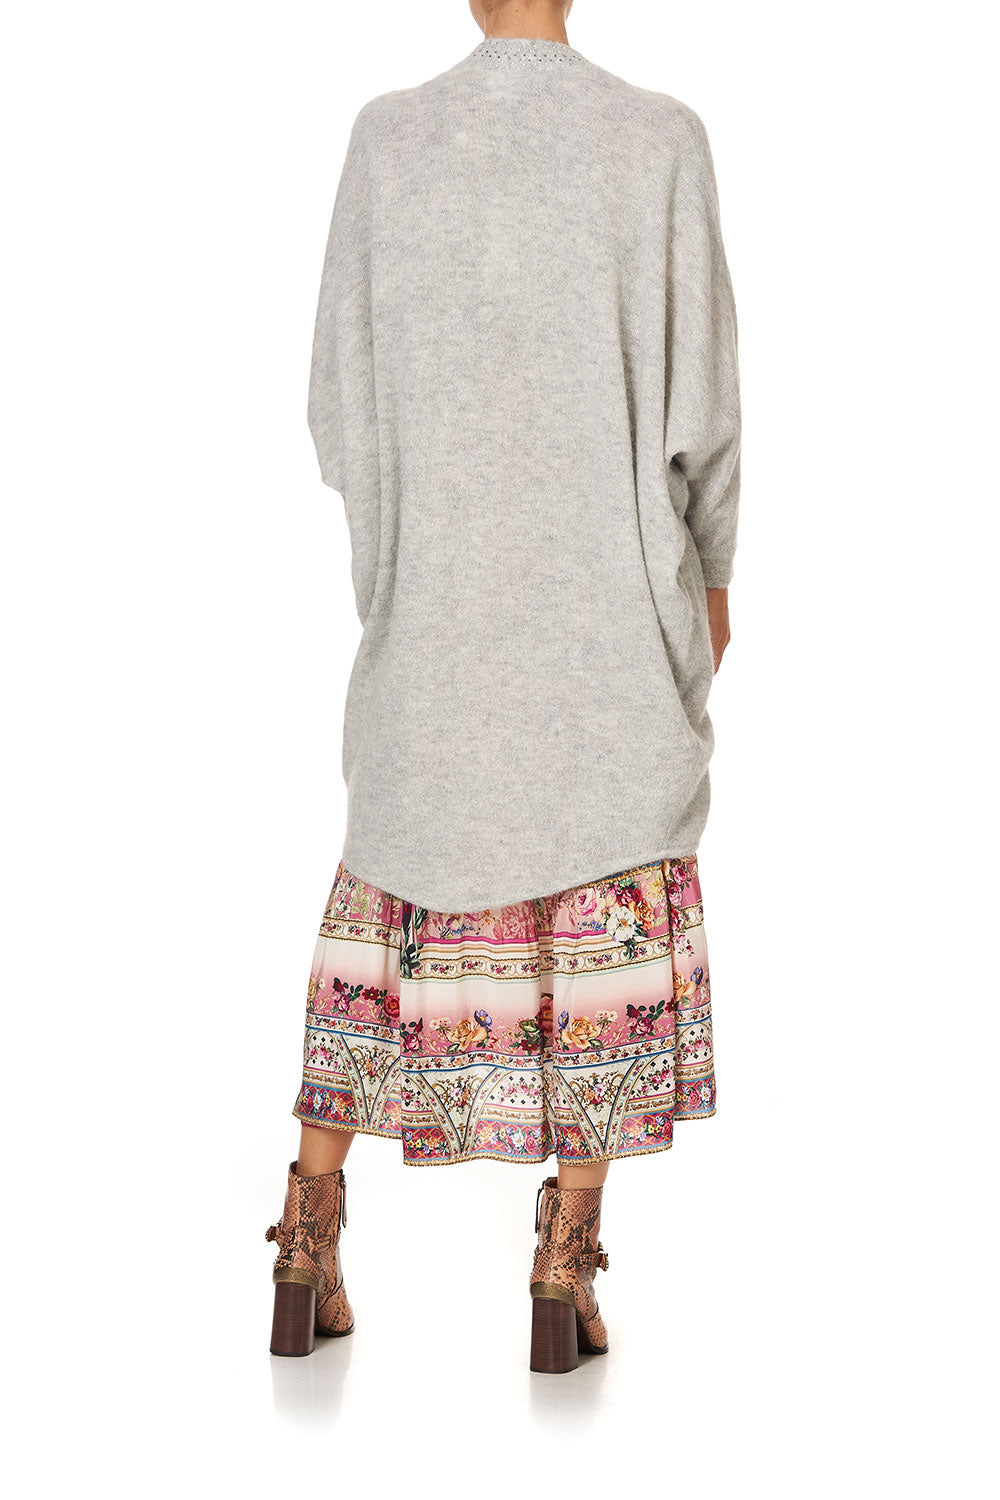 SOFT KNIT PONCHO WITH EMBROIDERY GREY ISTENANYA